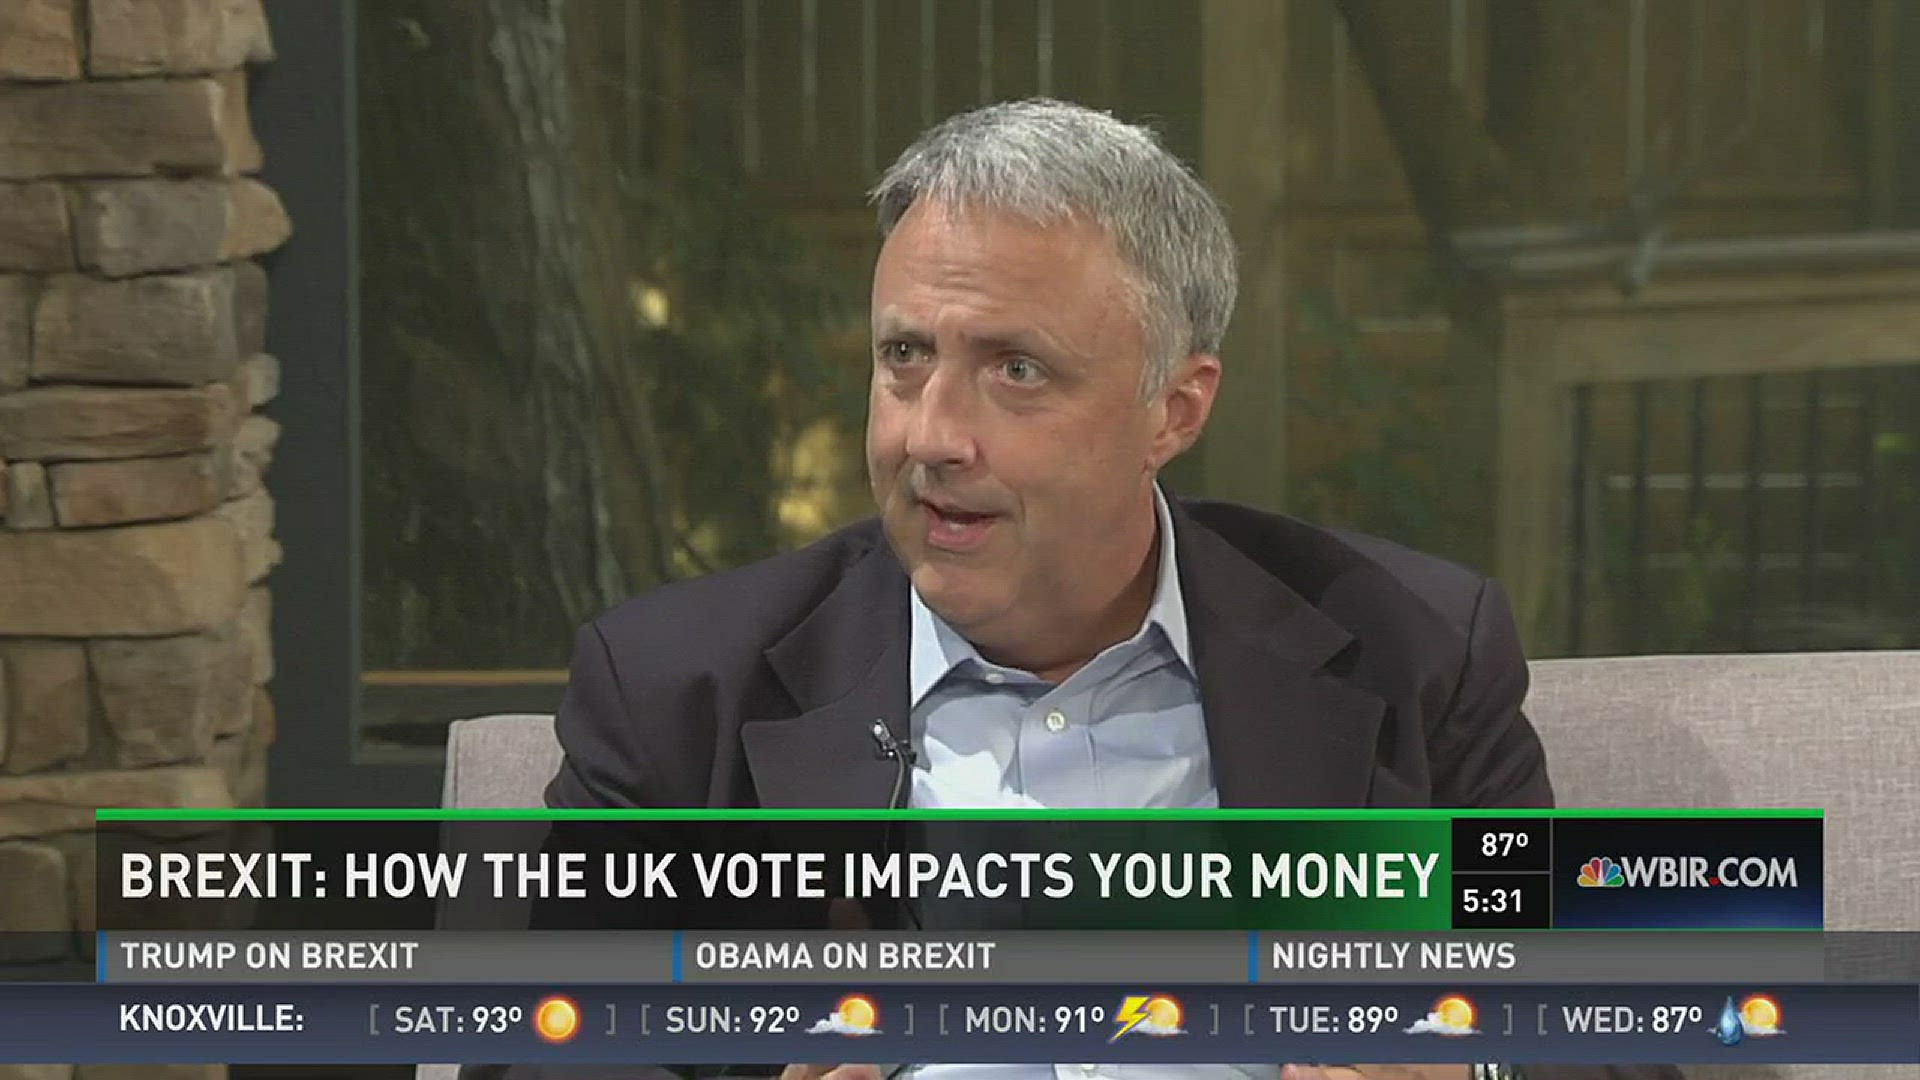 The president of Brogan Financial sits down with Beth to talk about the financial impact felt here in the U.S. following the announcement that the U.K. voted to leave the European Union.